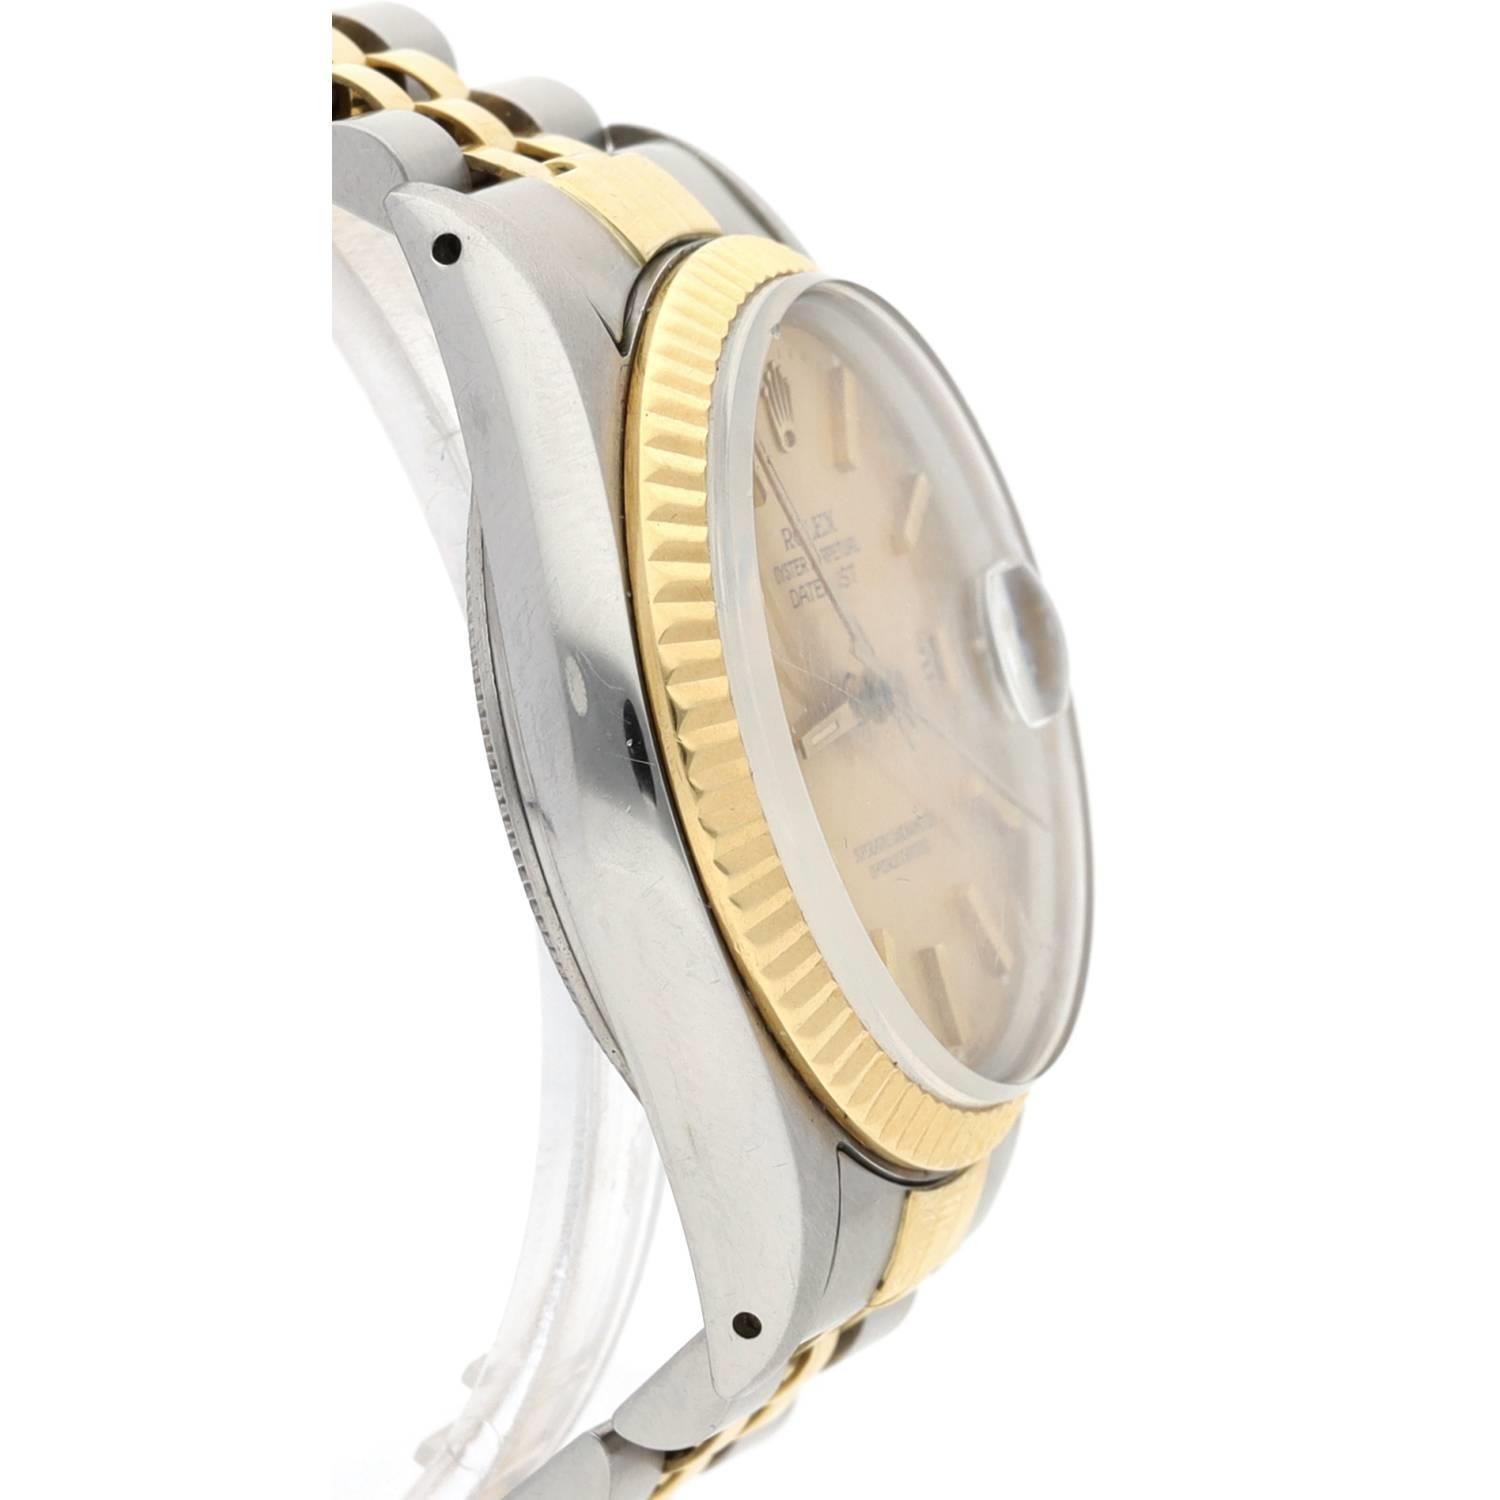 Rolex Oyster Perpetual Datejust gold and stainless steel gentleman's wristwatch, reference no. - Image 3 of 5